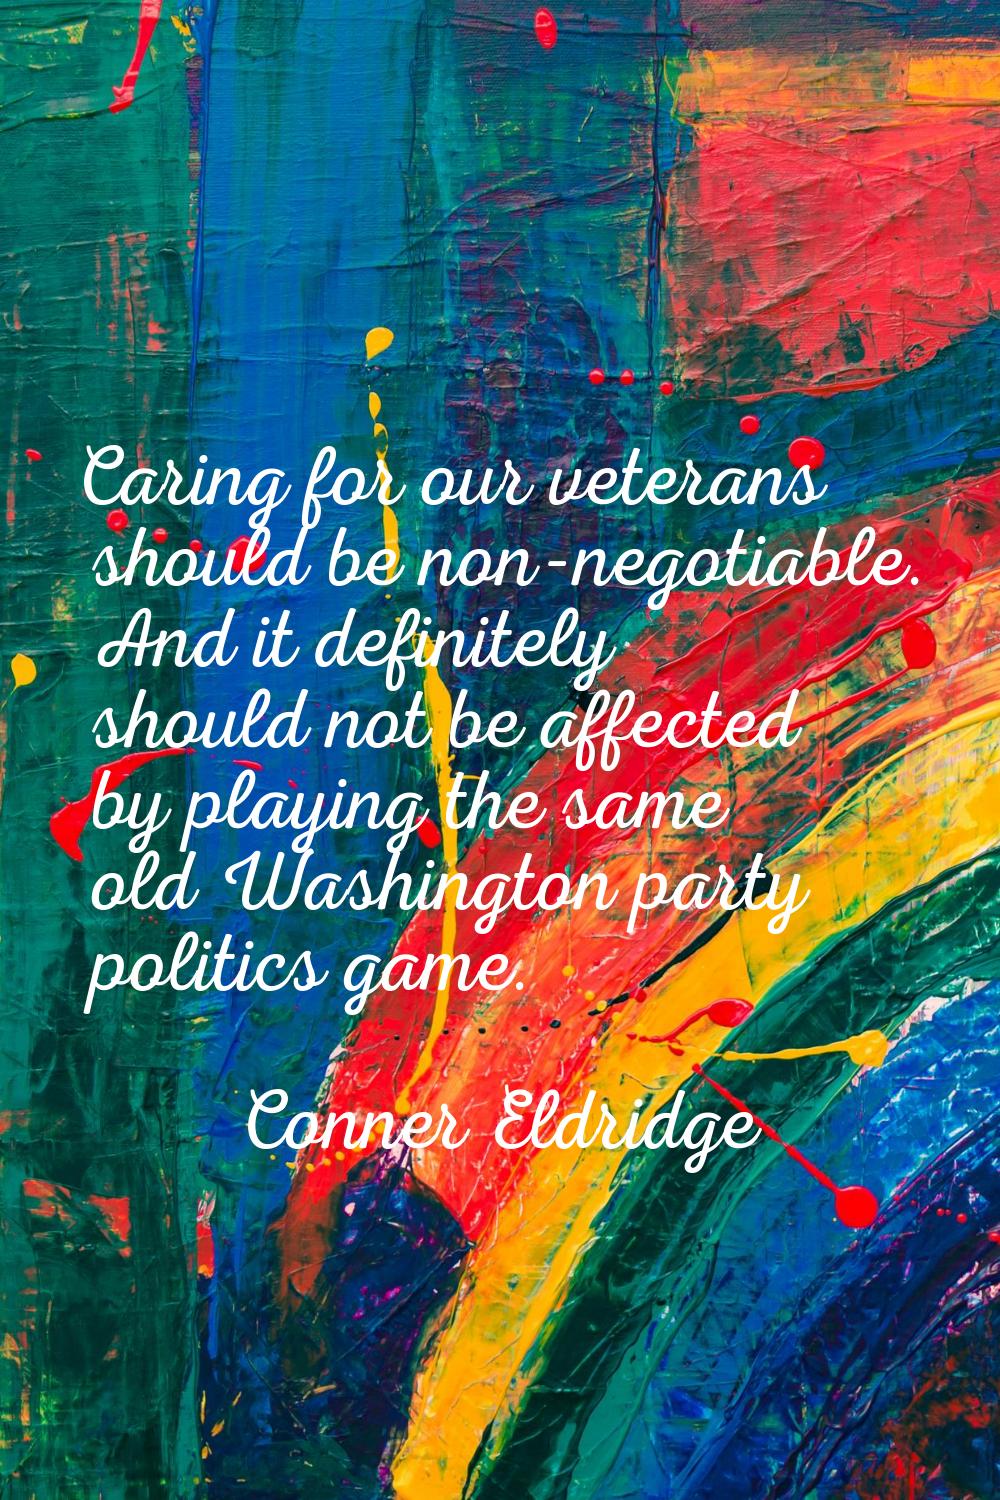 Caring for our veterans should be non-negotiable. And it definitely should not be affected by playi